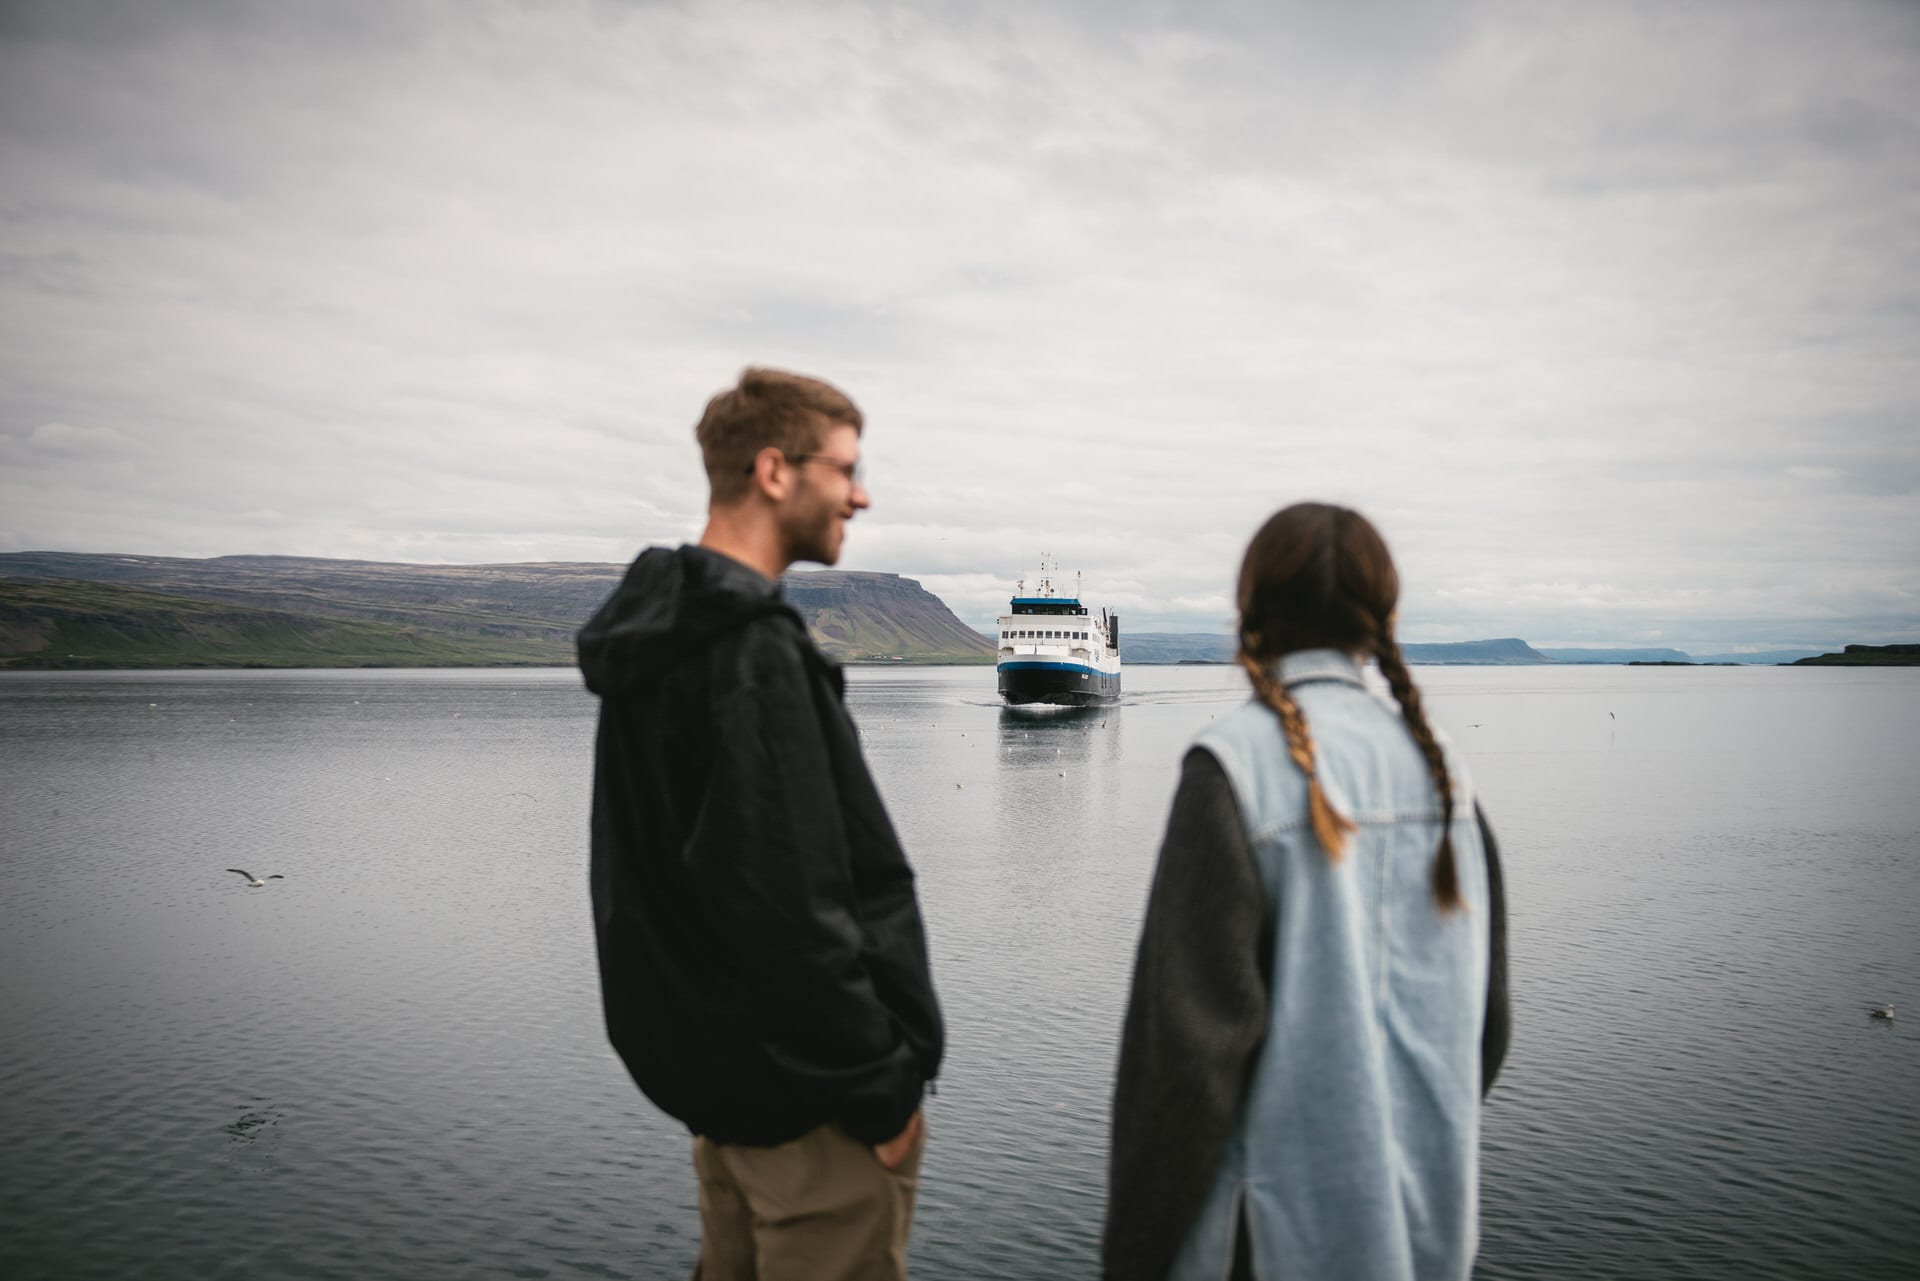 Crossing the shimmering waves, their love story rides the ferry's embrace, from Westfjords to Snaefelseness, a chapter of their adventure.